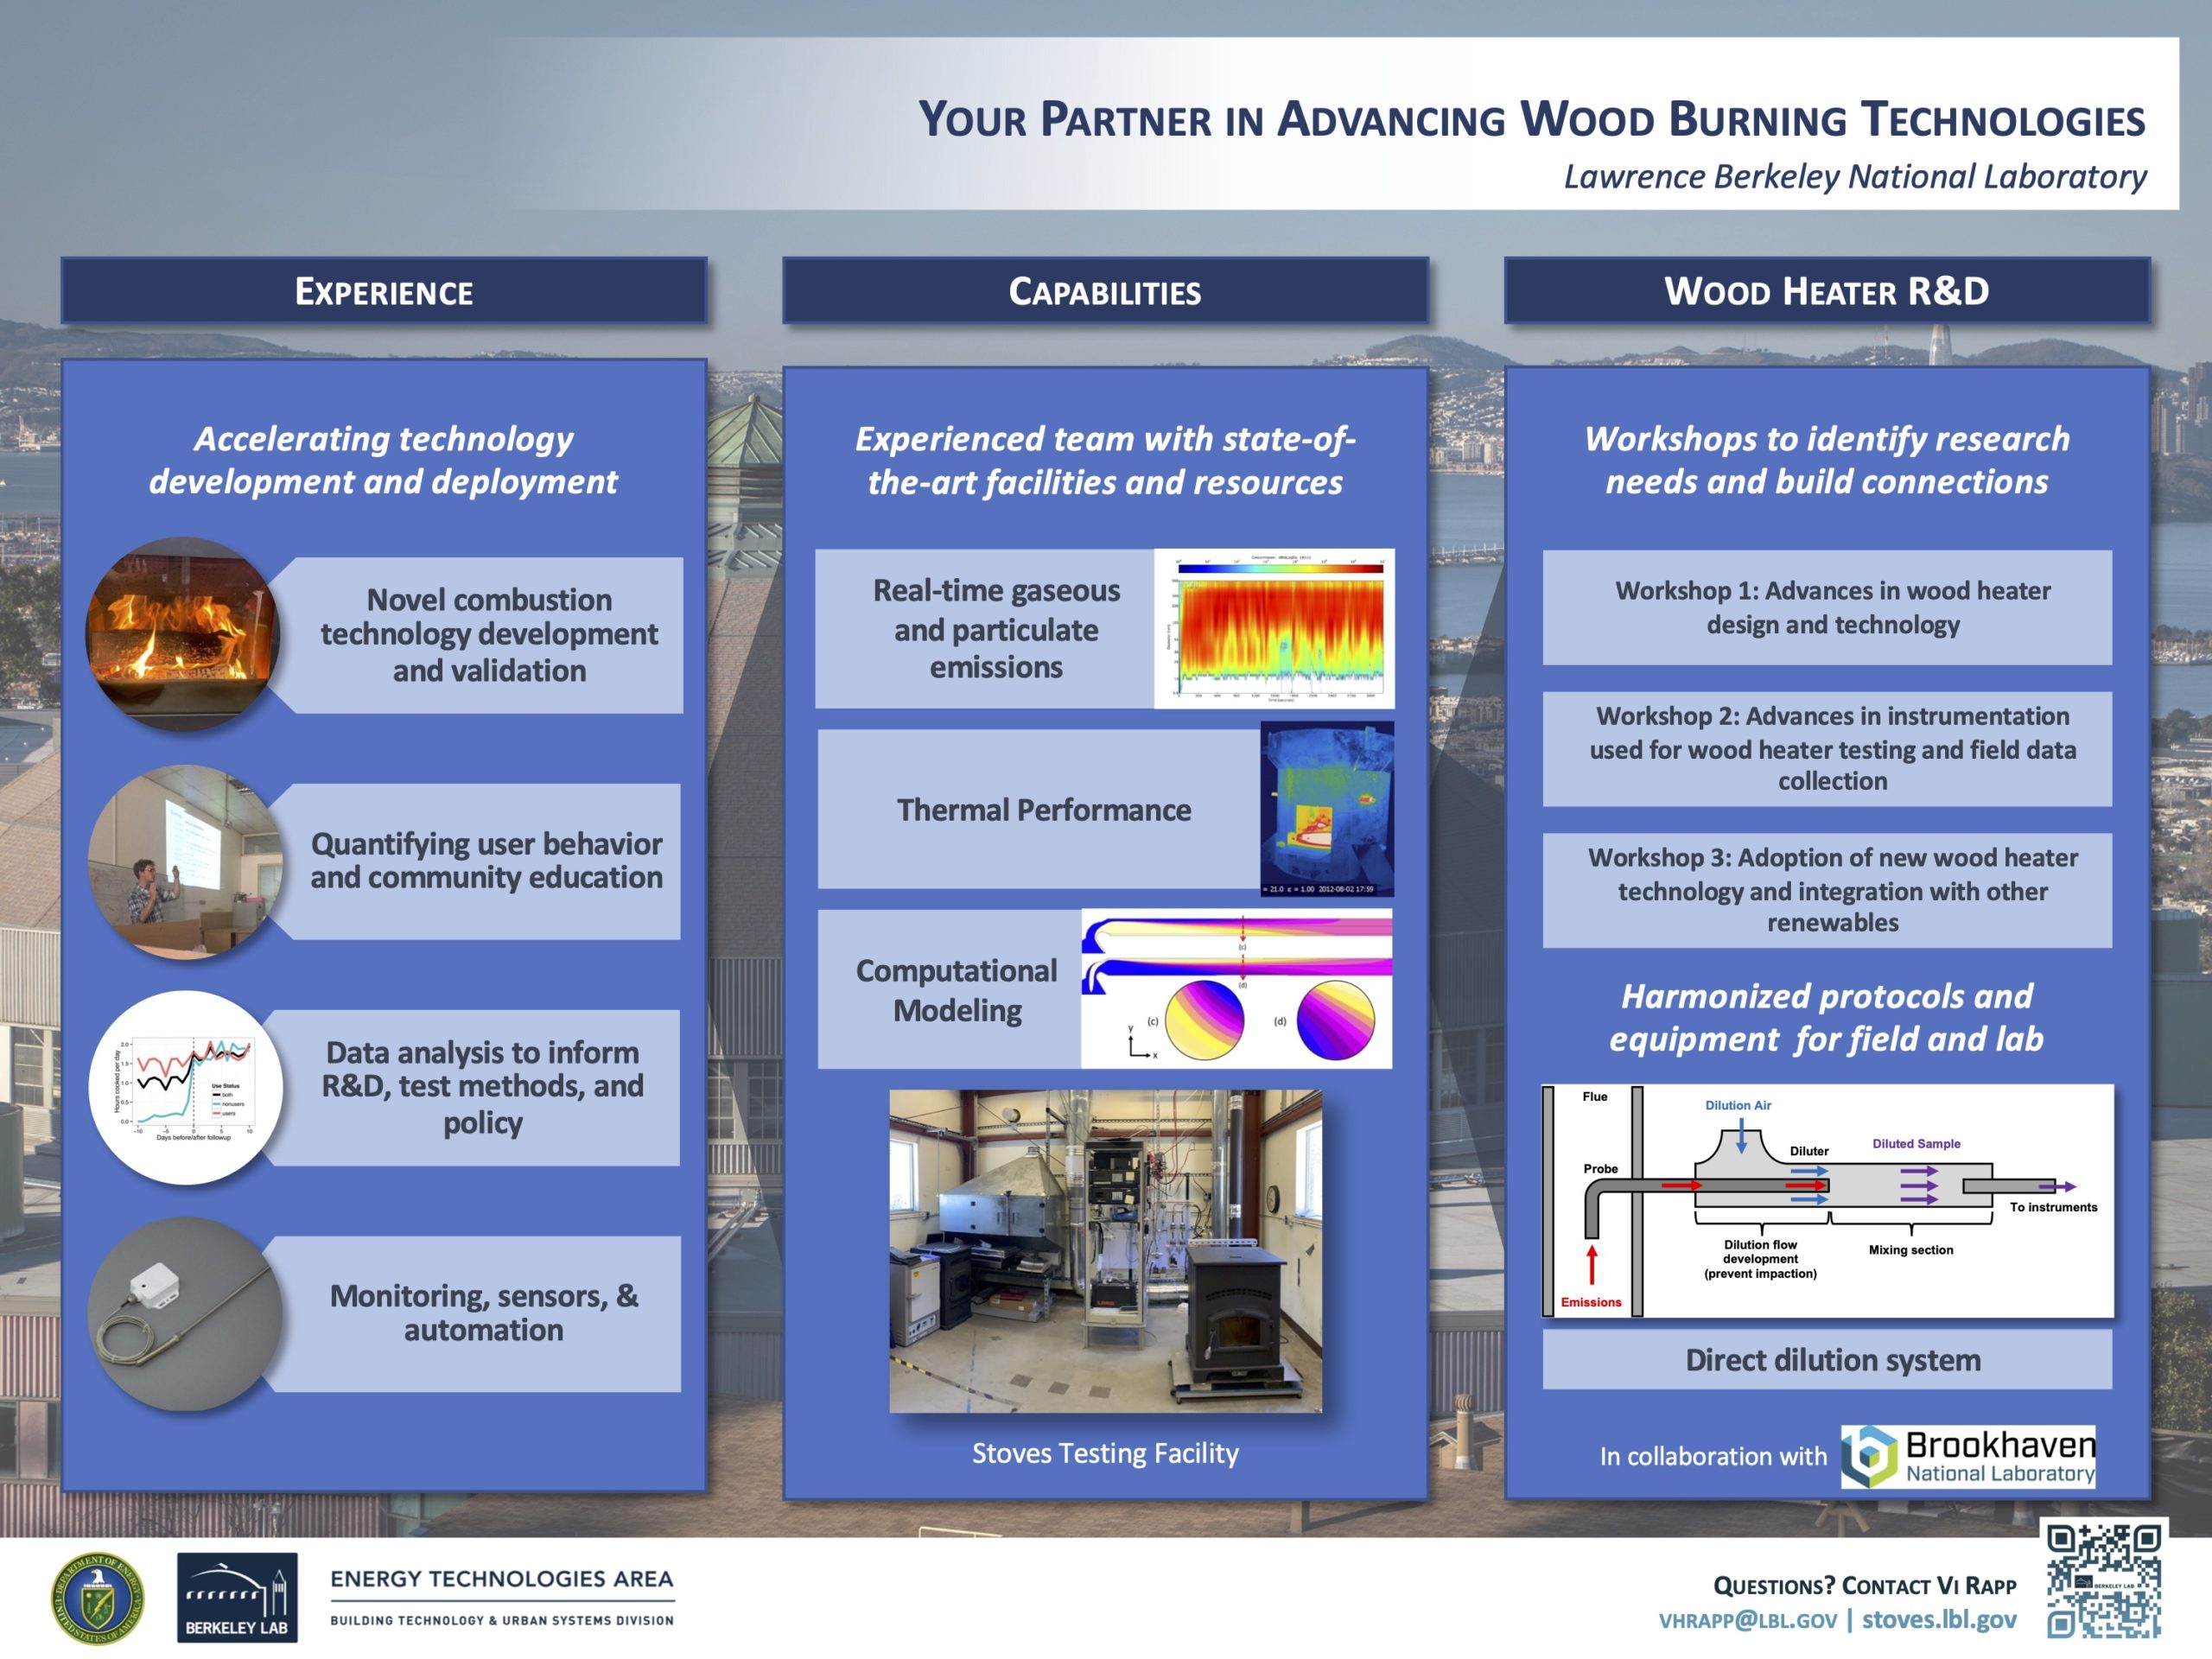 Poster showing LBNL wood heater research and capabilities